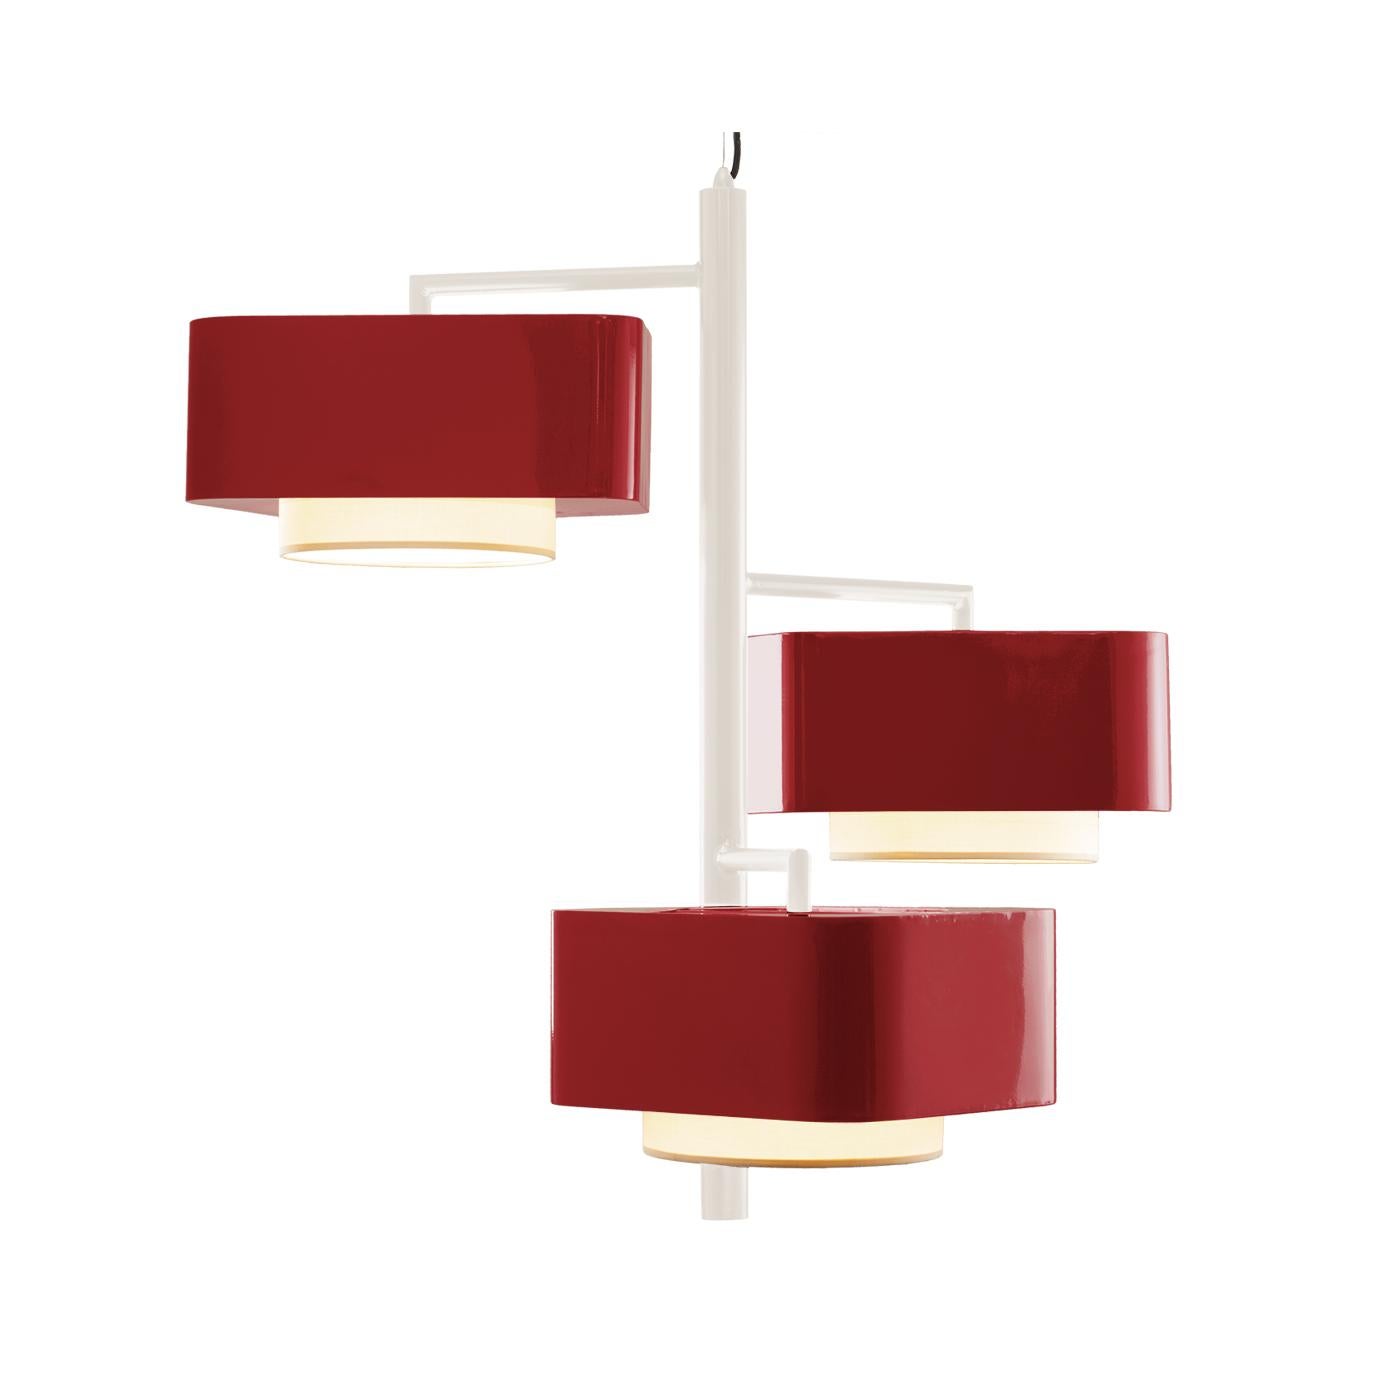 Powder-Coated Contemporary Art Deco Inspired Carousel I Pendant Lamp in Lipstick Red For Sale